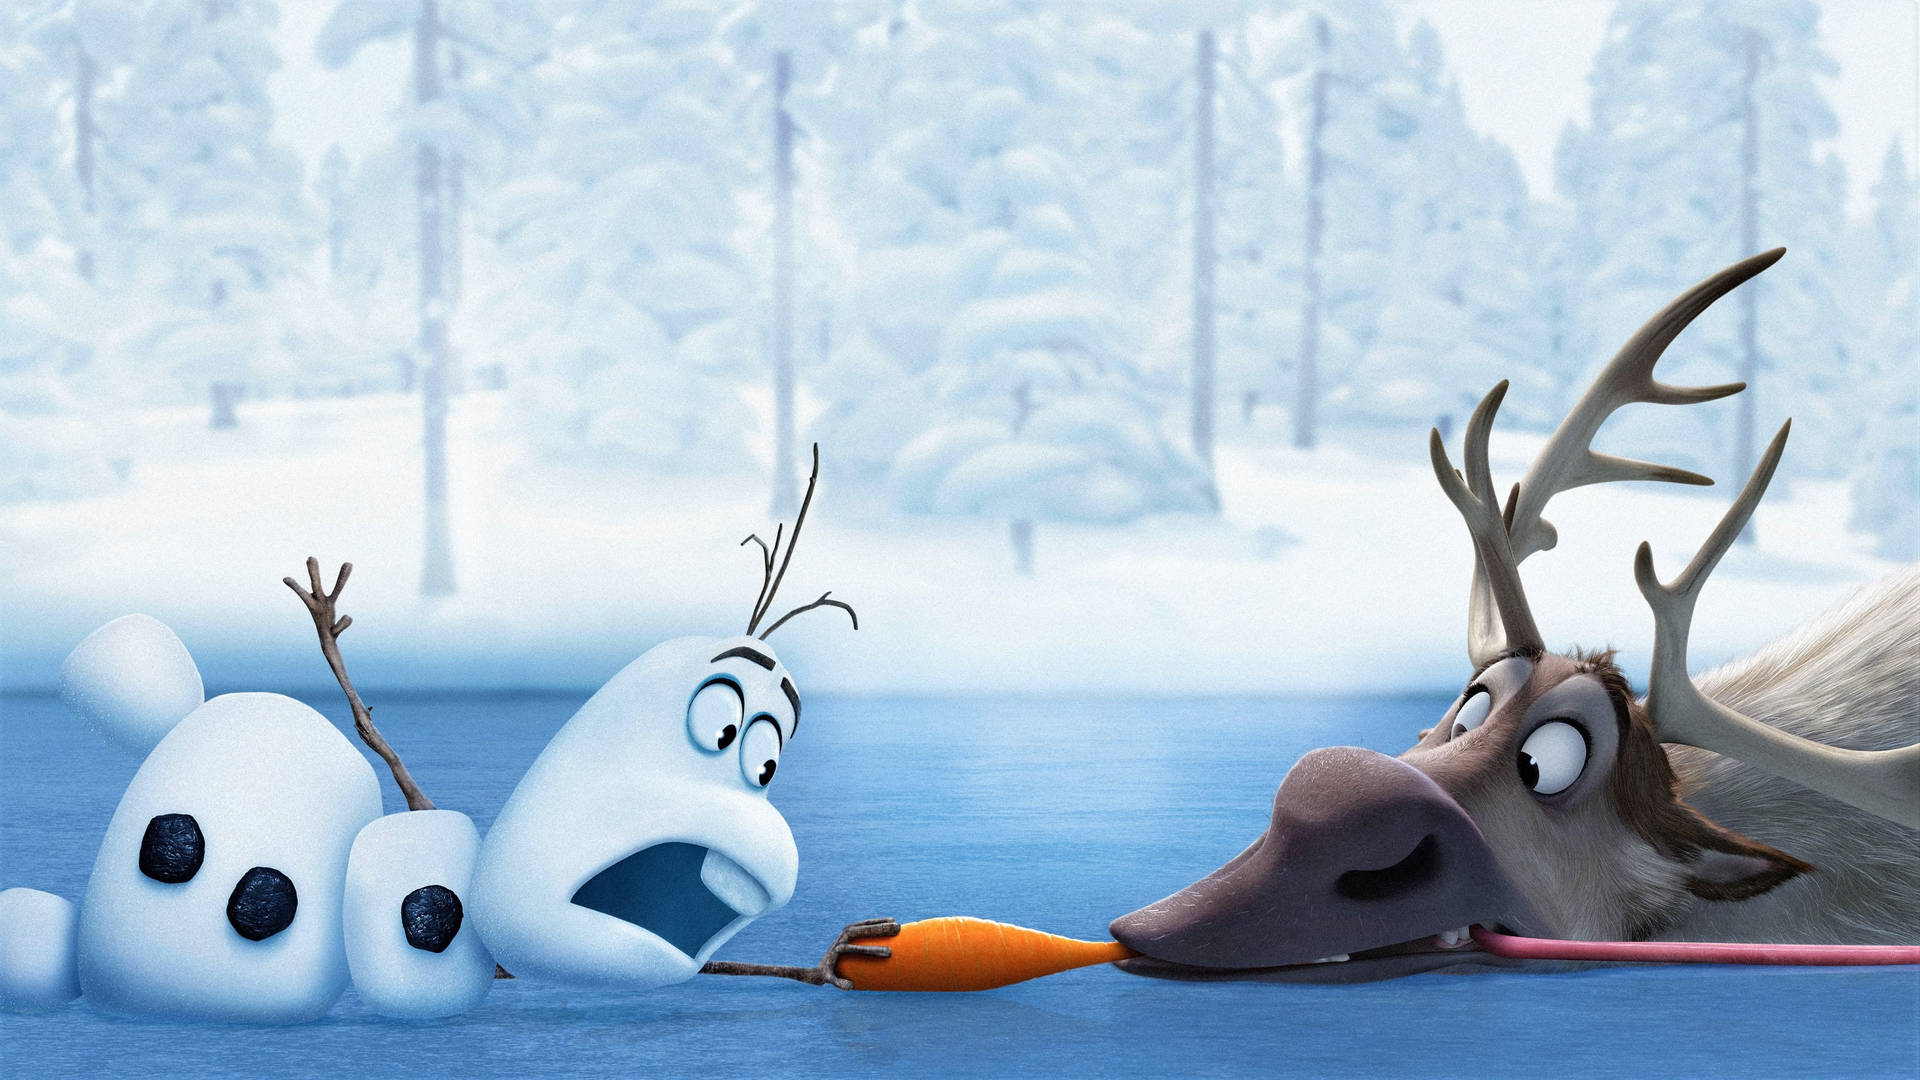 Frozen Olaf And Sven Background